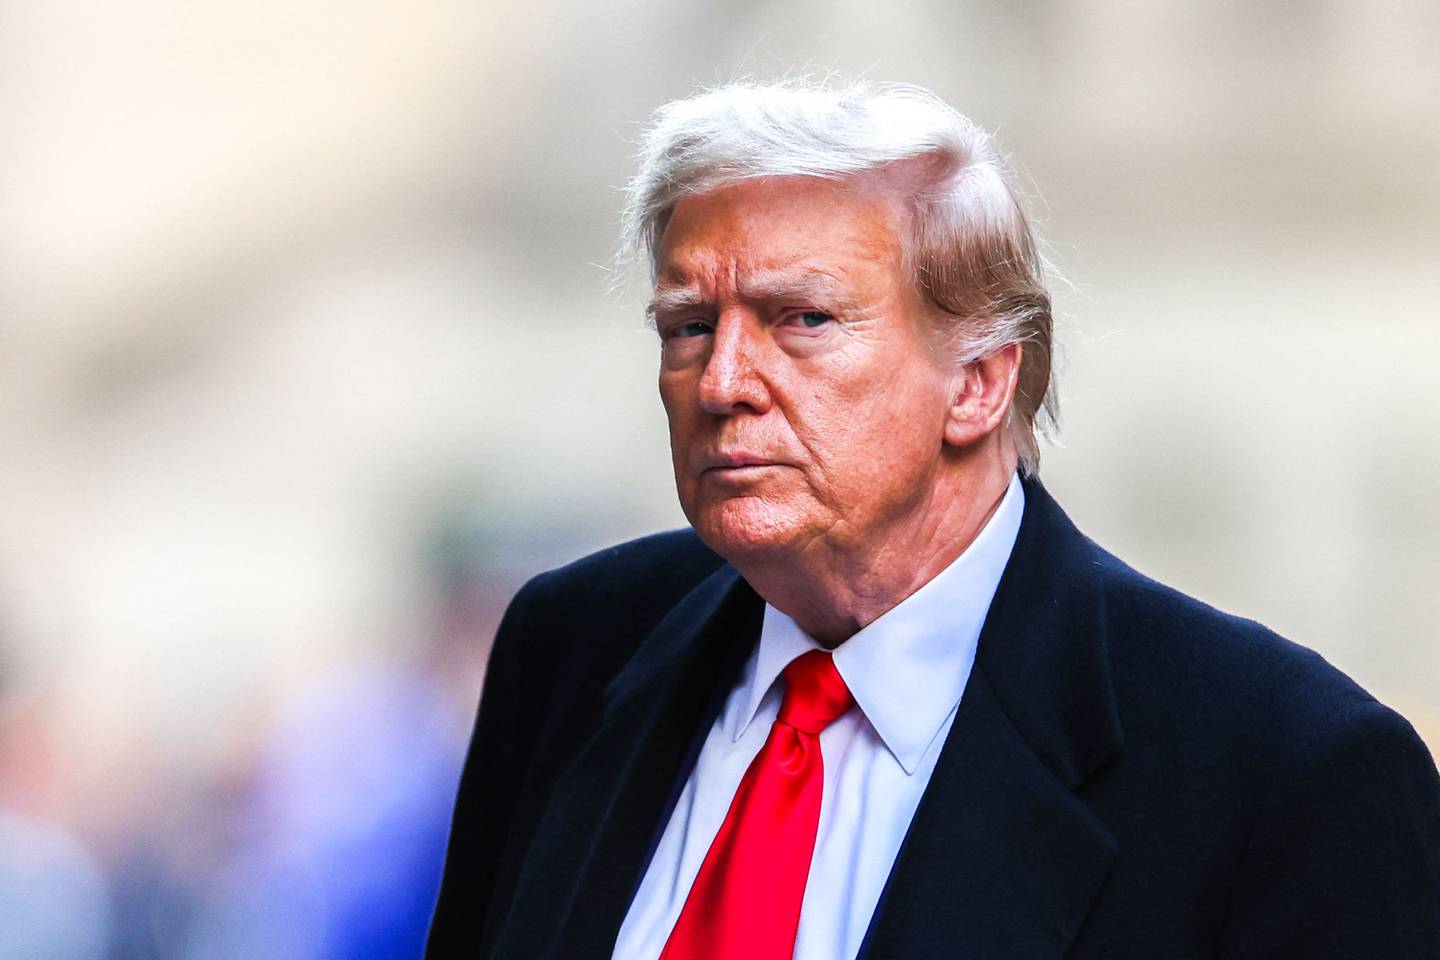 (FILES) Former US President Donald Trump arrives at 40 Wall Street after his court hearing to determine the date of his trial for allegedly covering up hush money payments linked to extramarital affairs in New York City on March 25, 2024. Embattled former US president Donald Trump posted a $175 million bond in his New York civil fraud case April 1, 2024, avoiding payment of a $454 million penalty while his case winds through the appeals process. (Photo by Charly TRIBALLEAU / AFP)